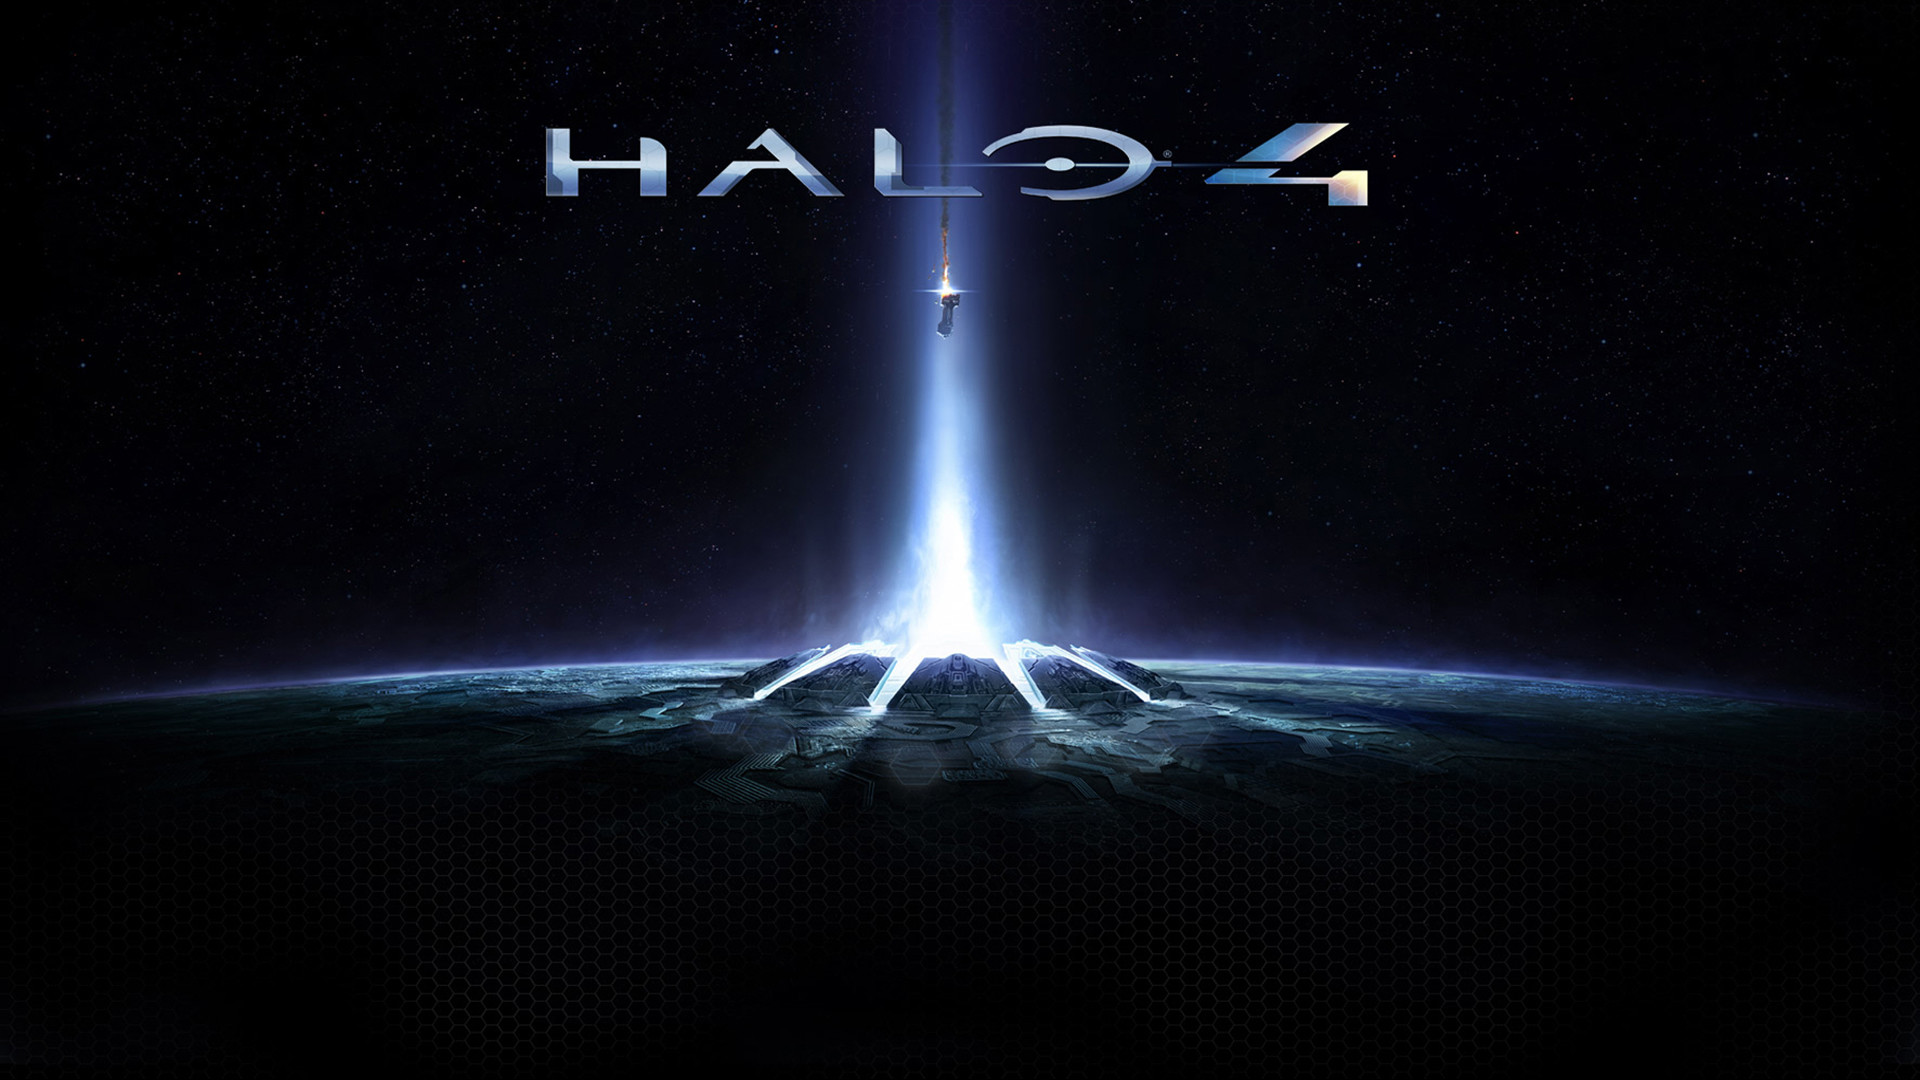 1920x1080 halo 4 wallpaper by isaacw3ston